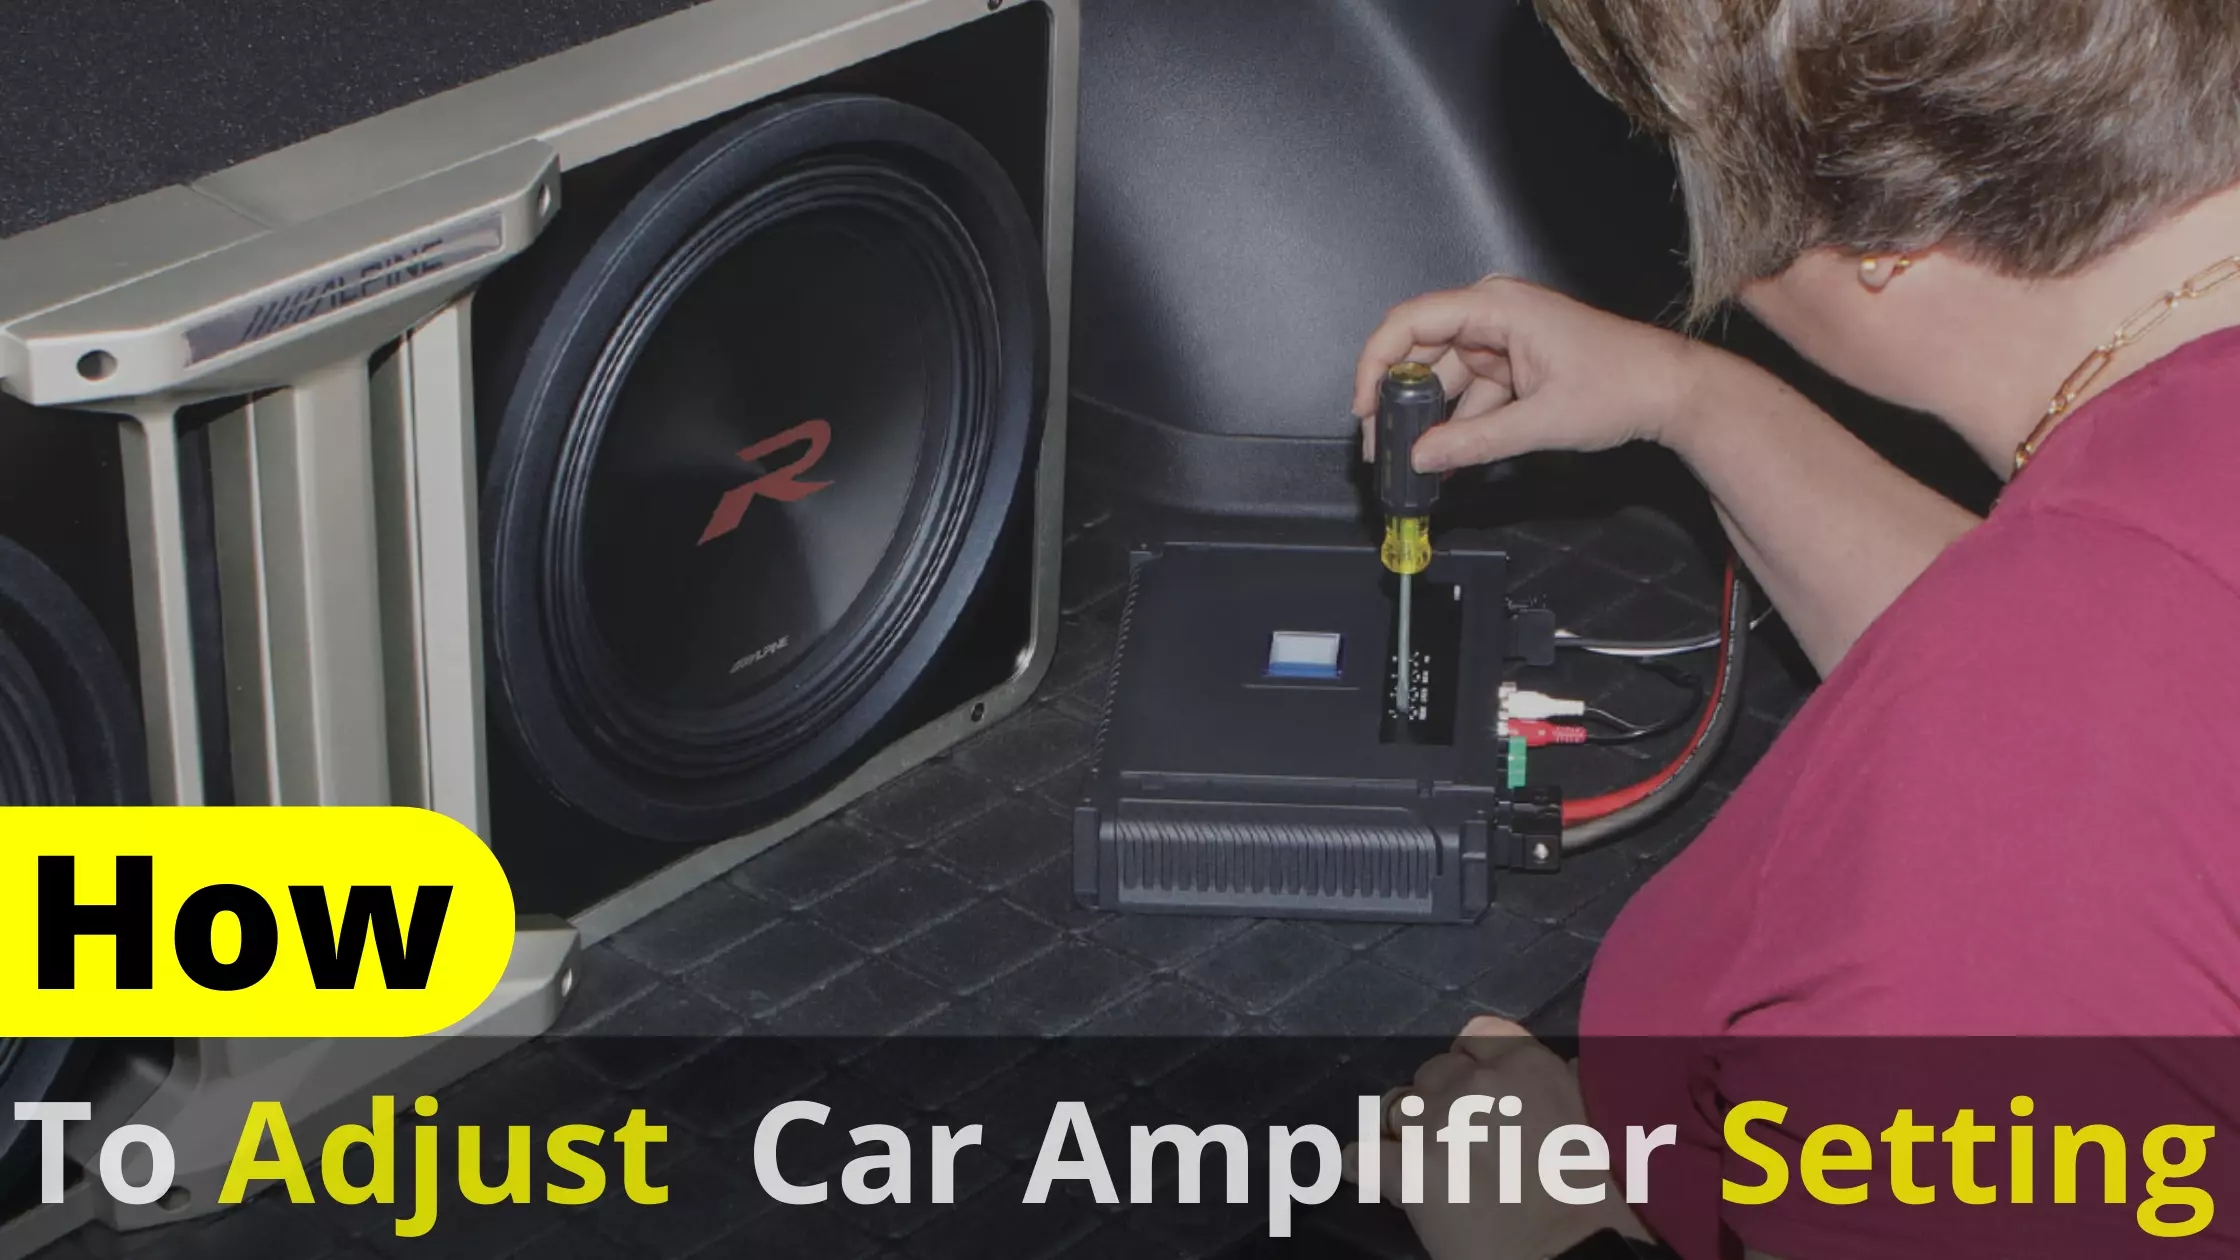 How To Adjust Car Amplifier Settings?